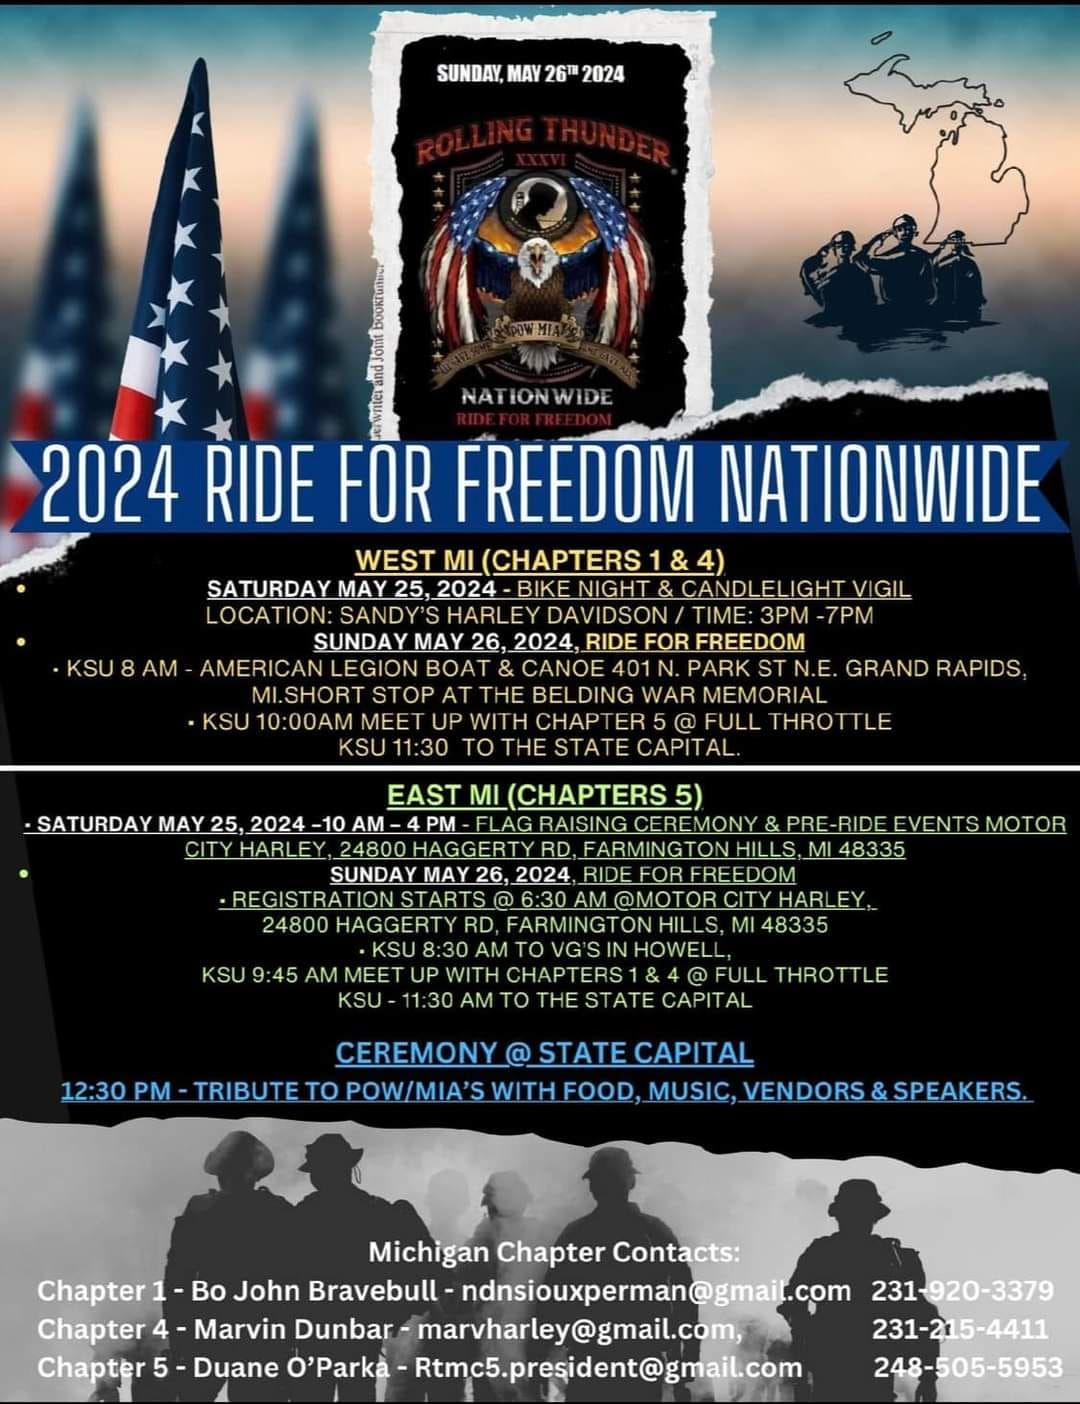 2024 Ride for Freedom NationWide